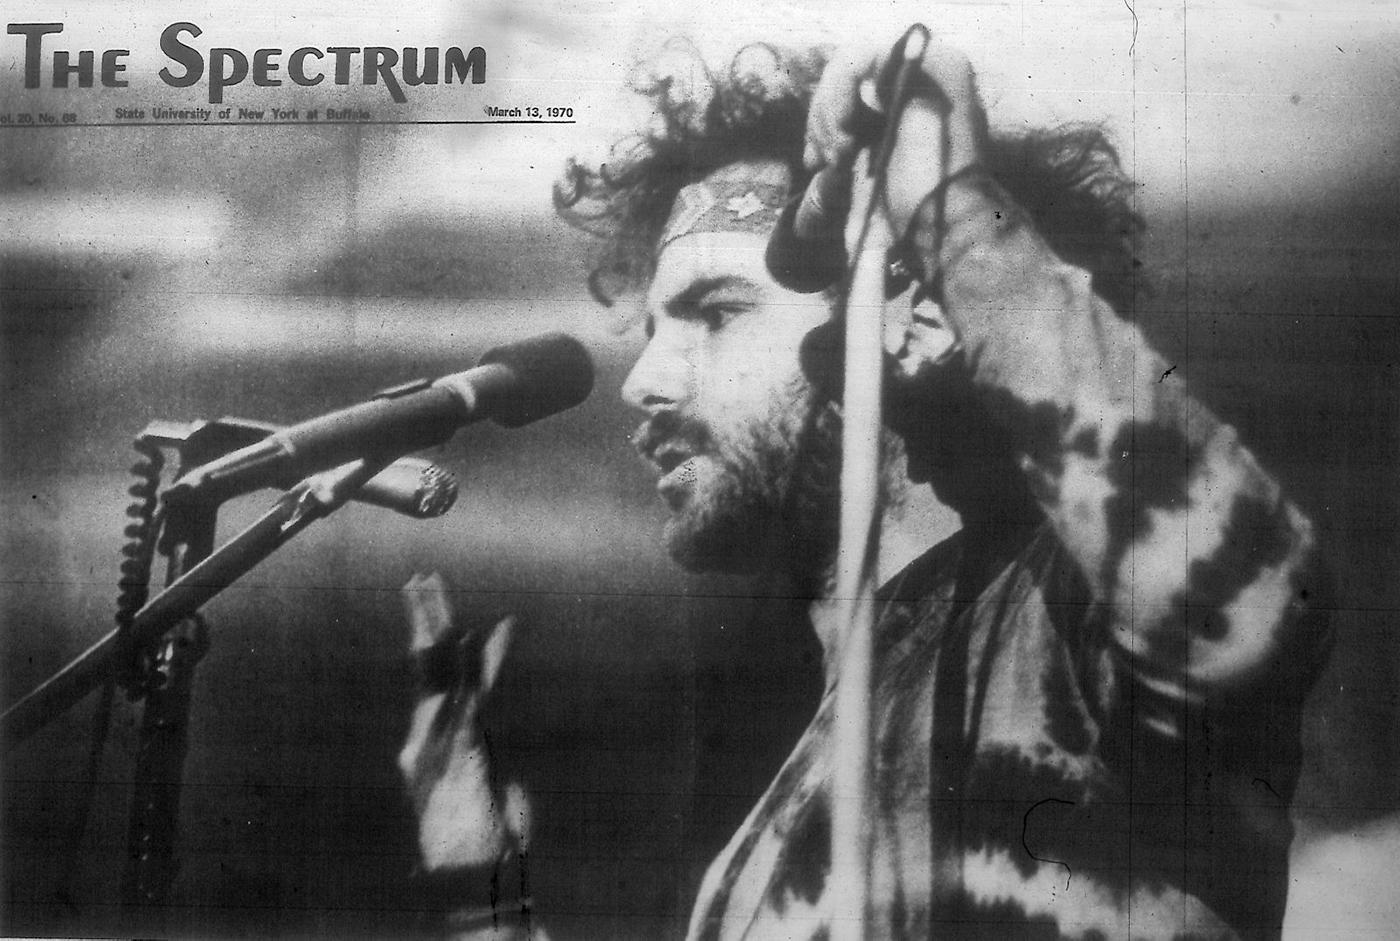 Jerry Rubin speaking at the University at Buffalo's Fillmore Room, one month after his conviction in the Chicago Eight conspiracy trial. Image: The Spectrum/Wikimedia Commons